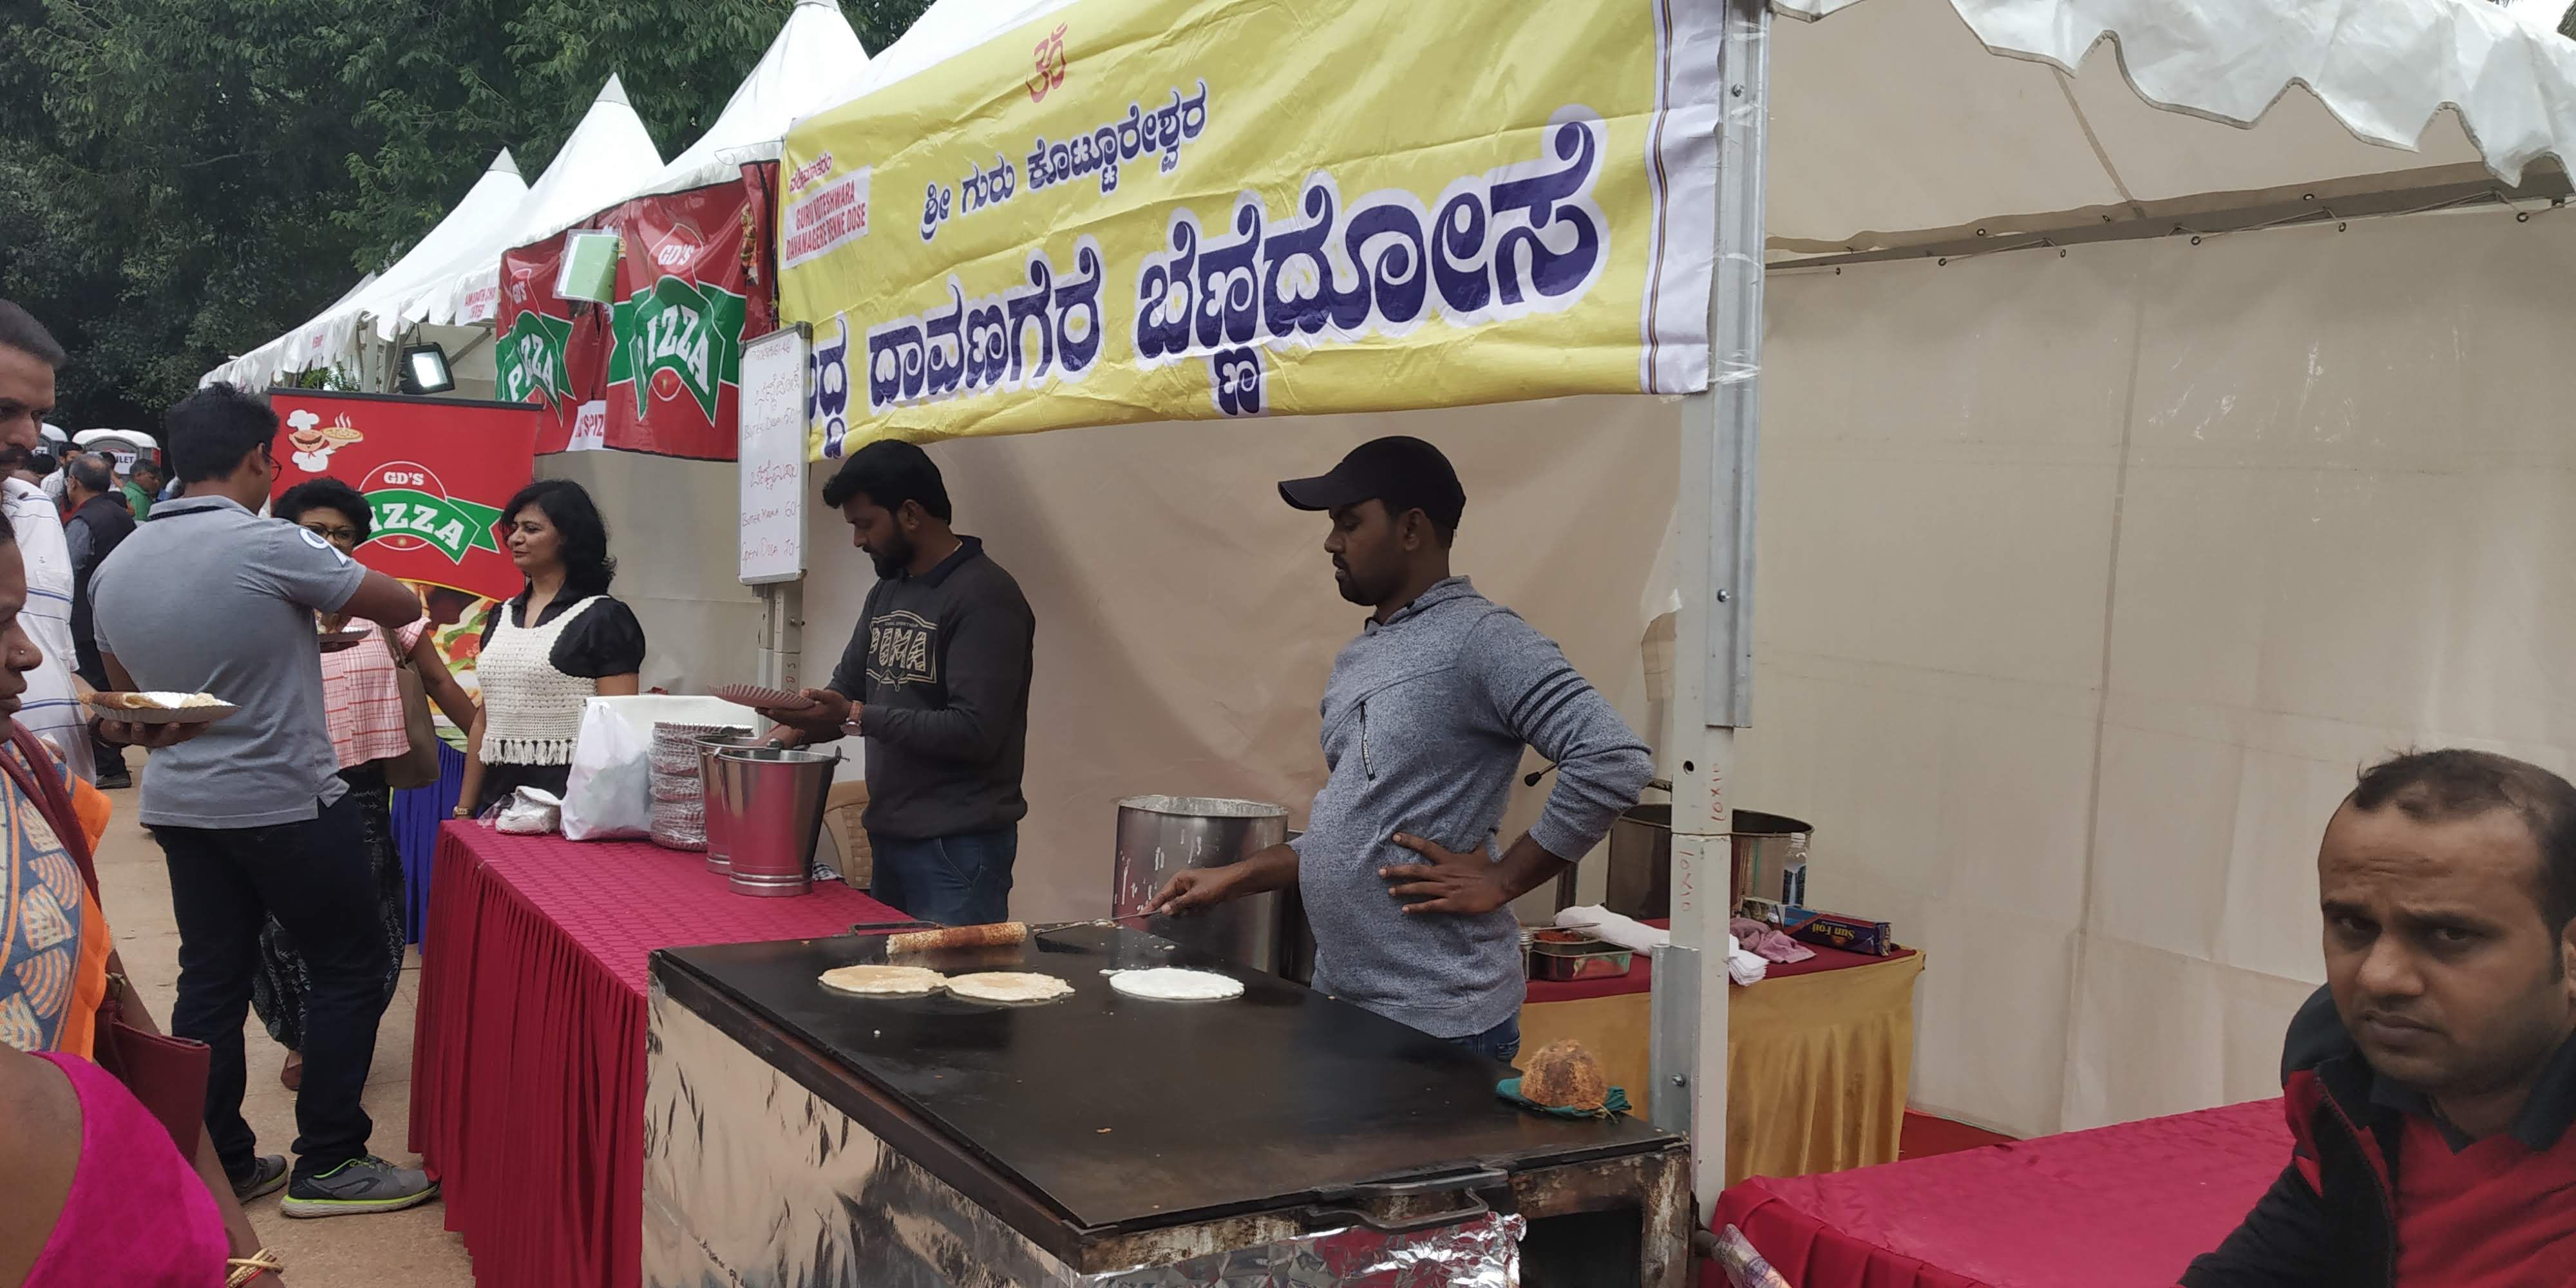 Picture of Davangere Benne Dose stall